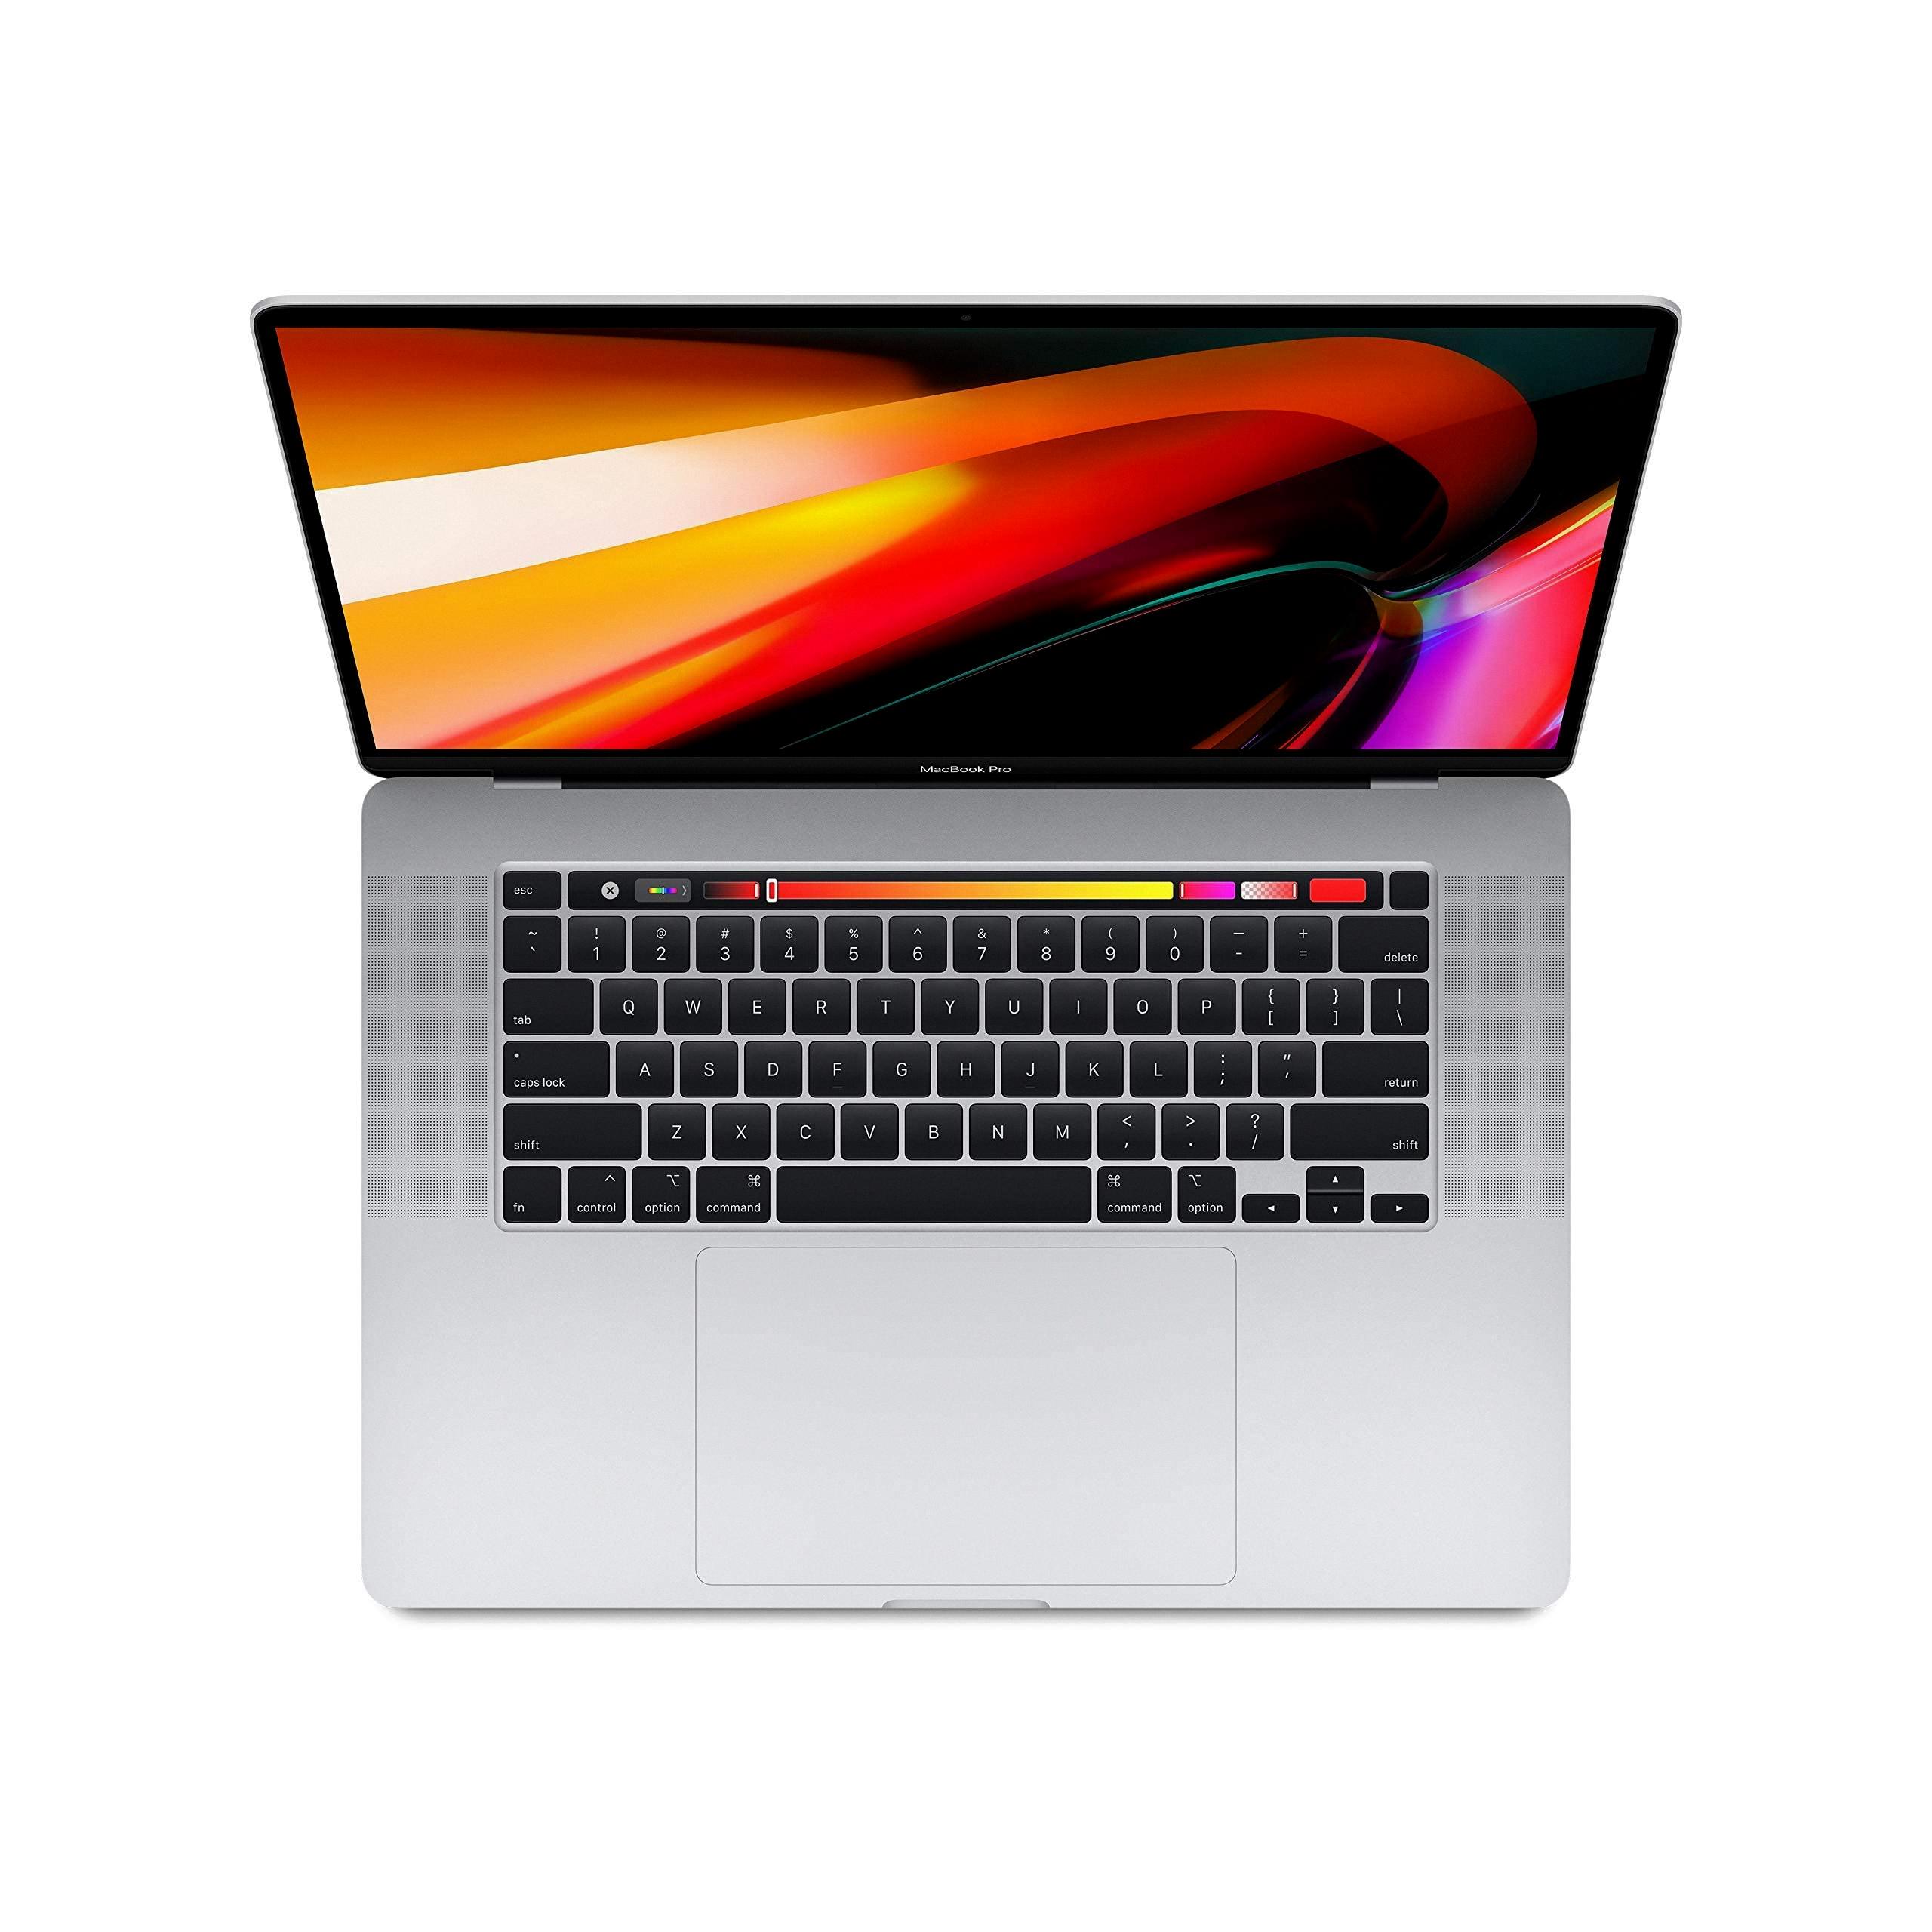 How To Scroll Down On Macbook Pro 13